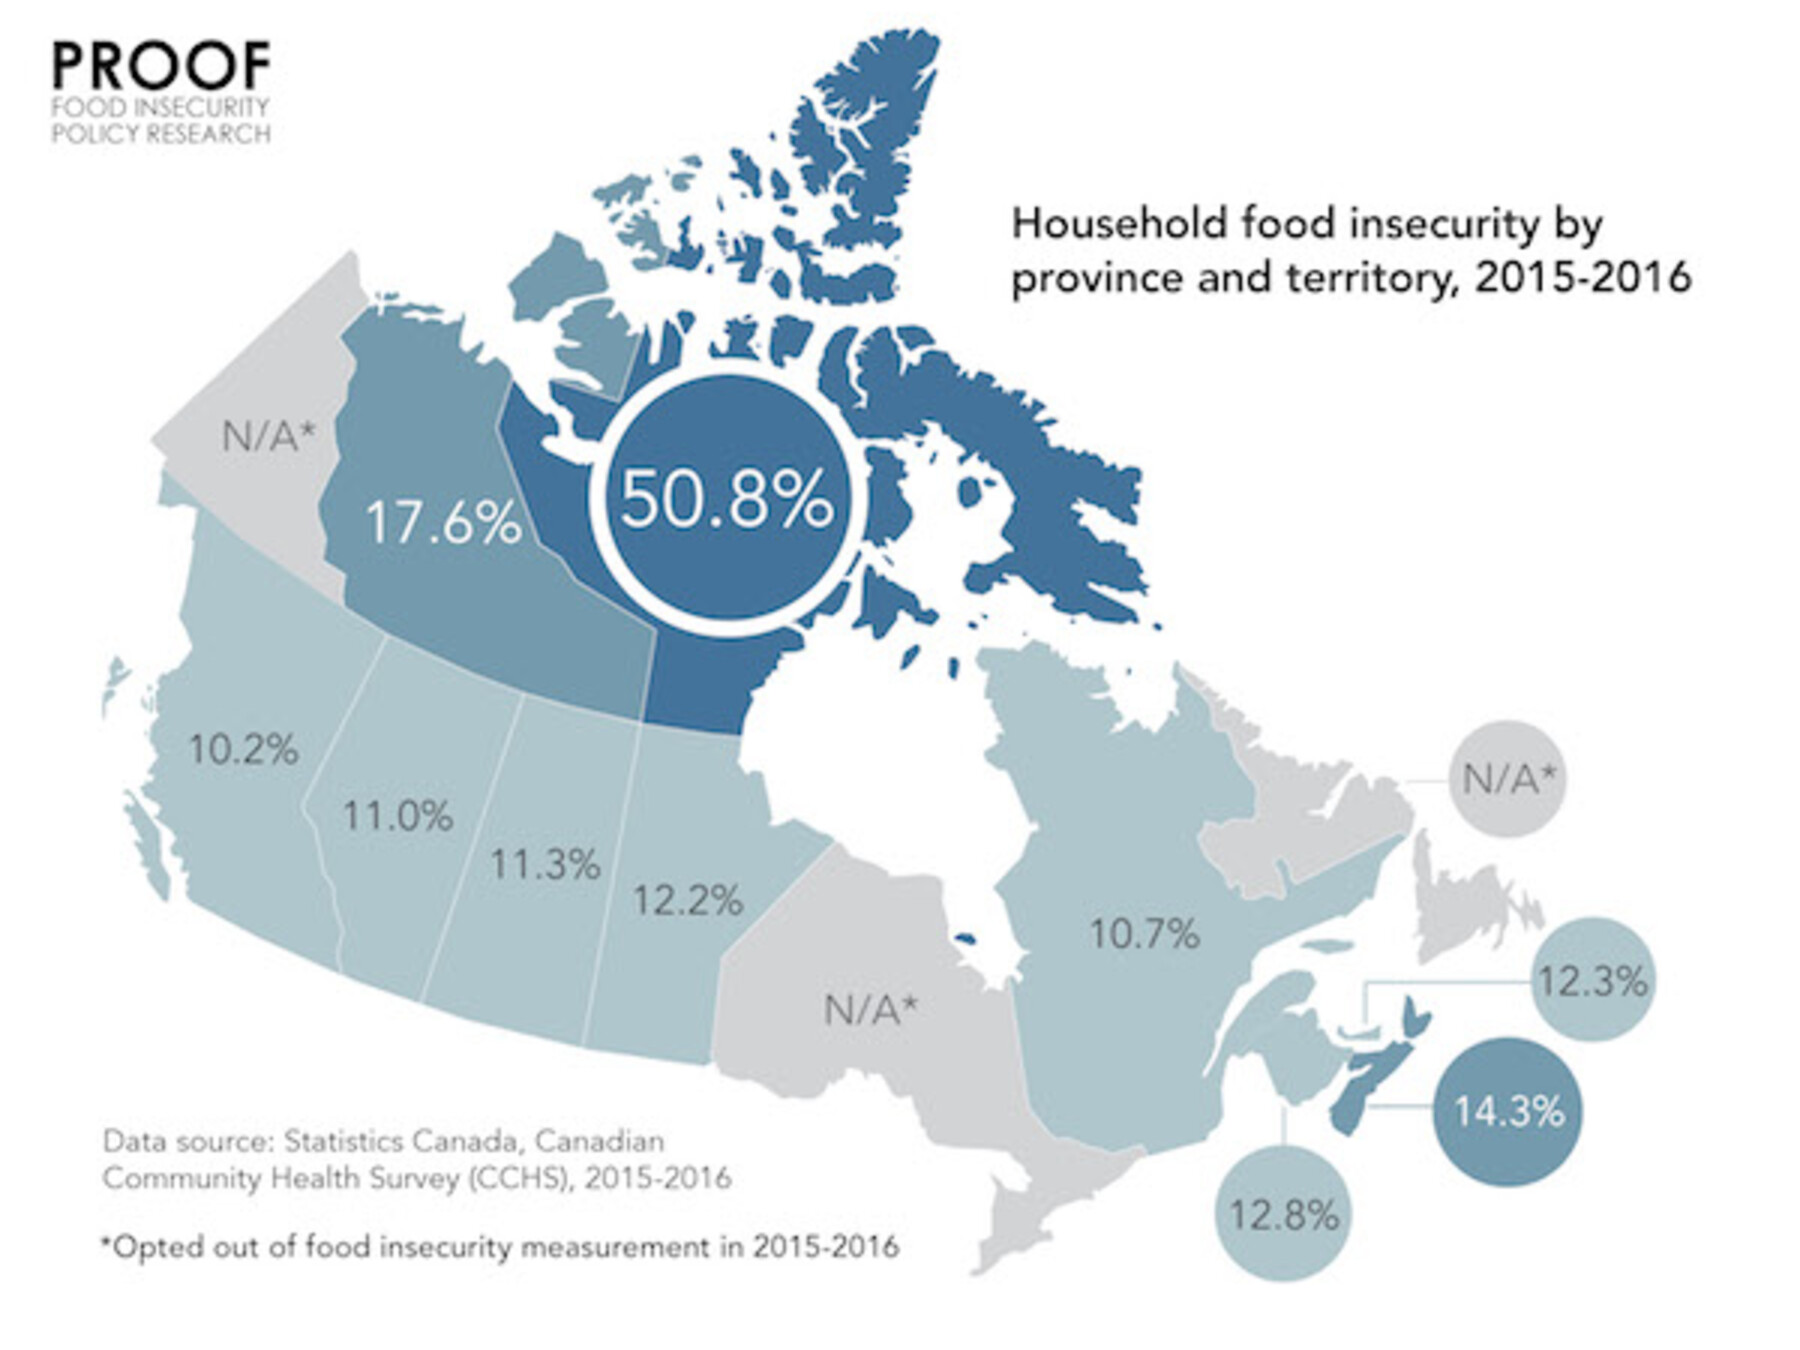 Map of food insecurity in Canada